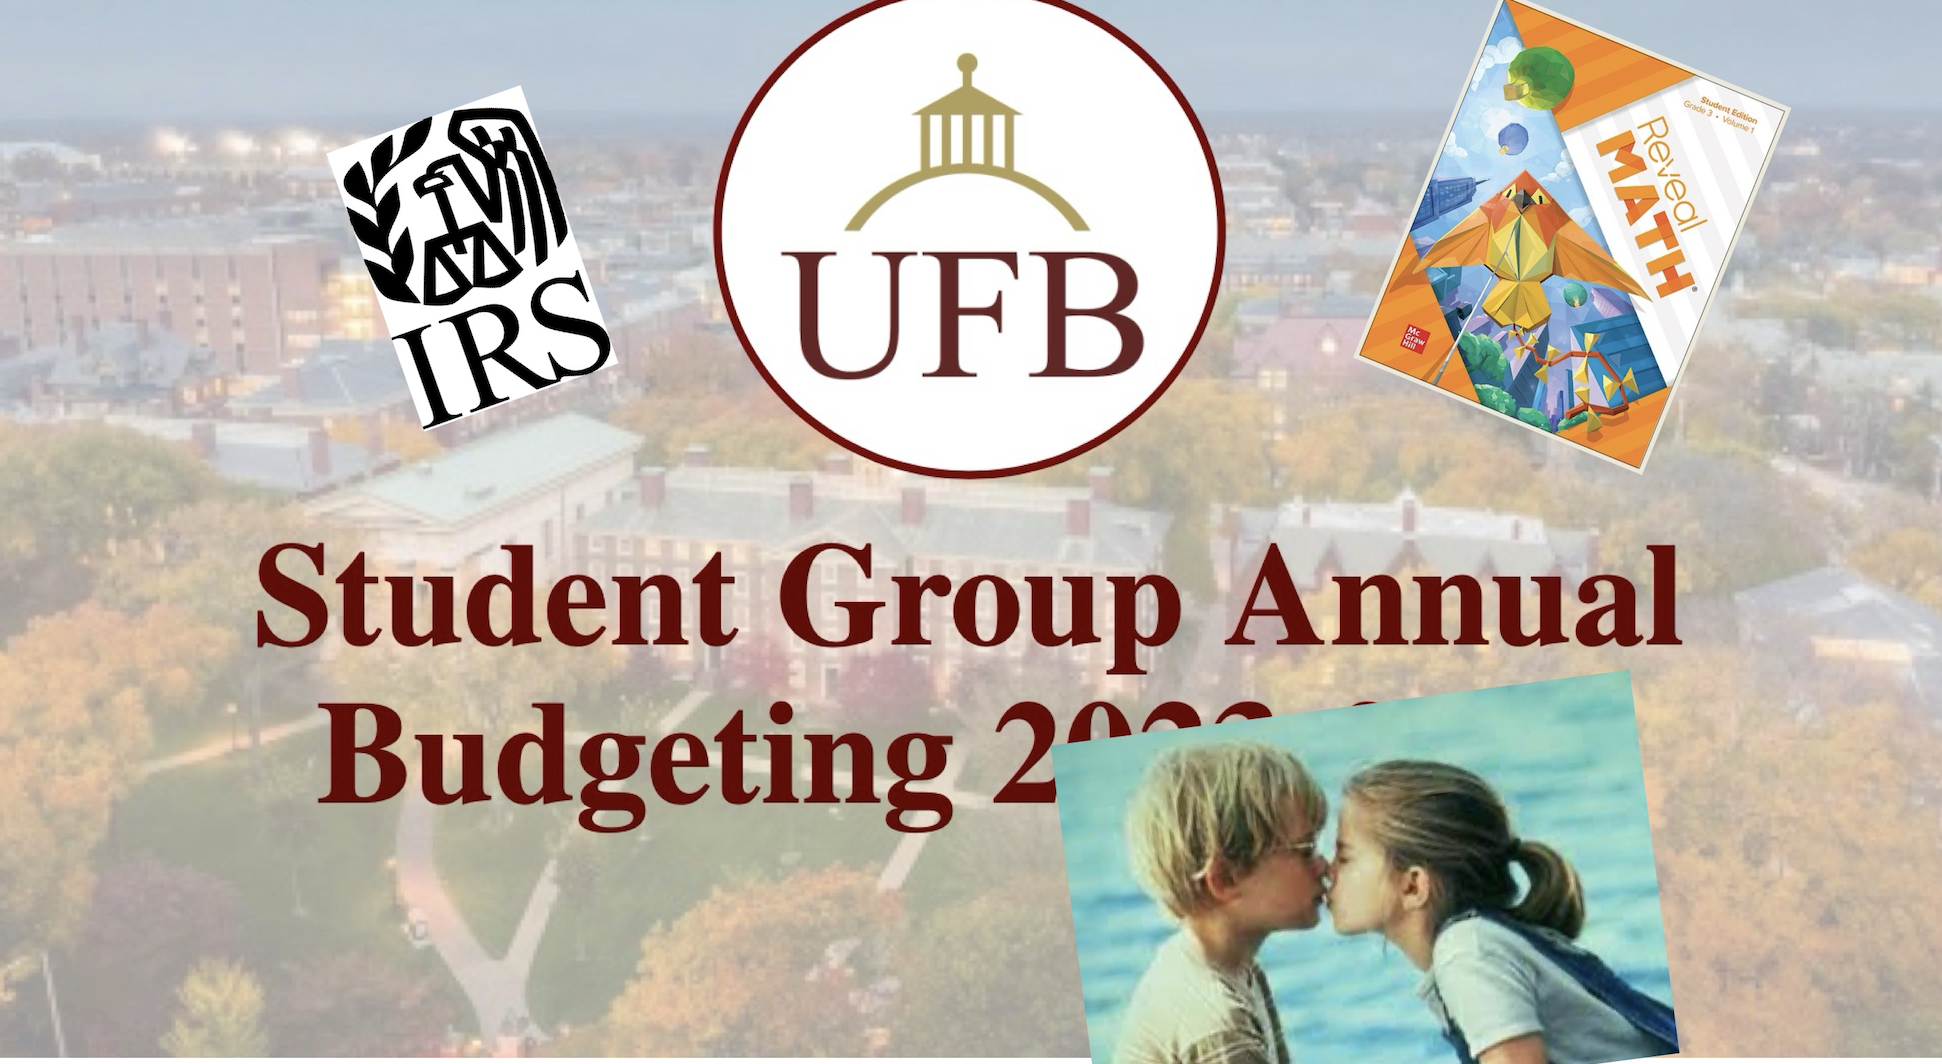 In New Budgeting Process, UFB Asks Club Leaders for Birth Certificate, Date of First Kiss, Cost of Third-Grade Math Textbook, and Was the Kiss Good, and Did They Use Tongue. 